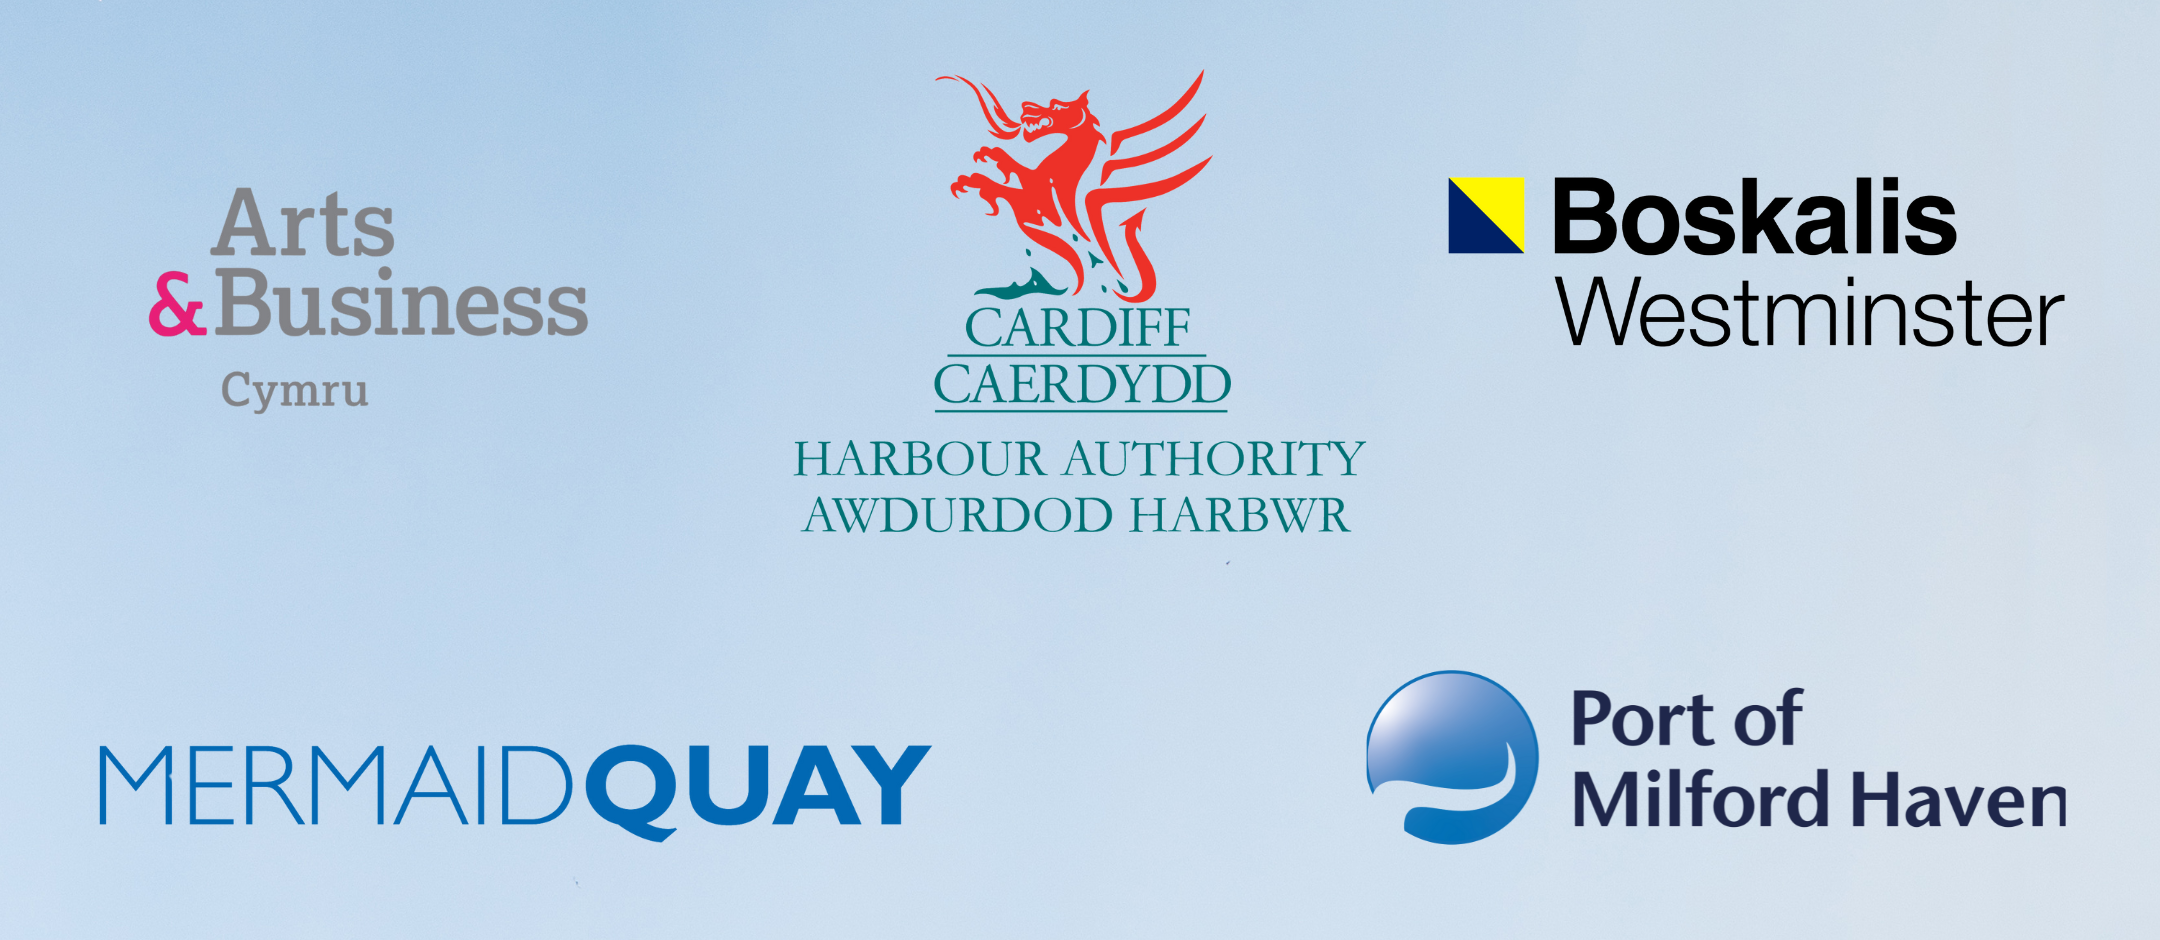 5 logos on a blue background. Logos of Cardiff Harbour Authority, Boskalis Westminster, Arts & Business Cymru, Mermaid Quay and the Port of Milford Haven.